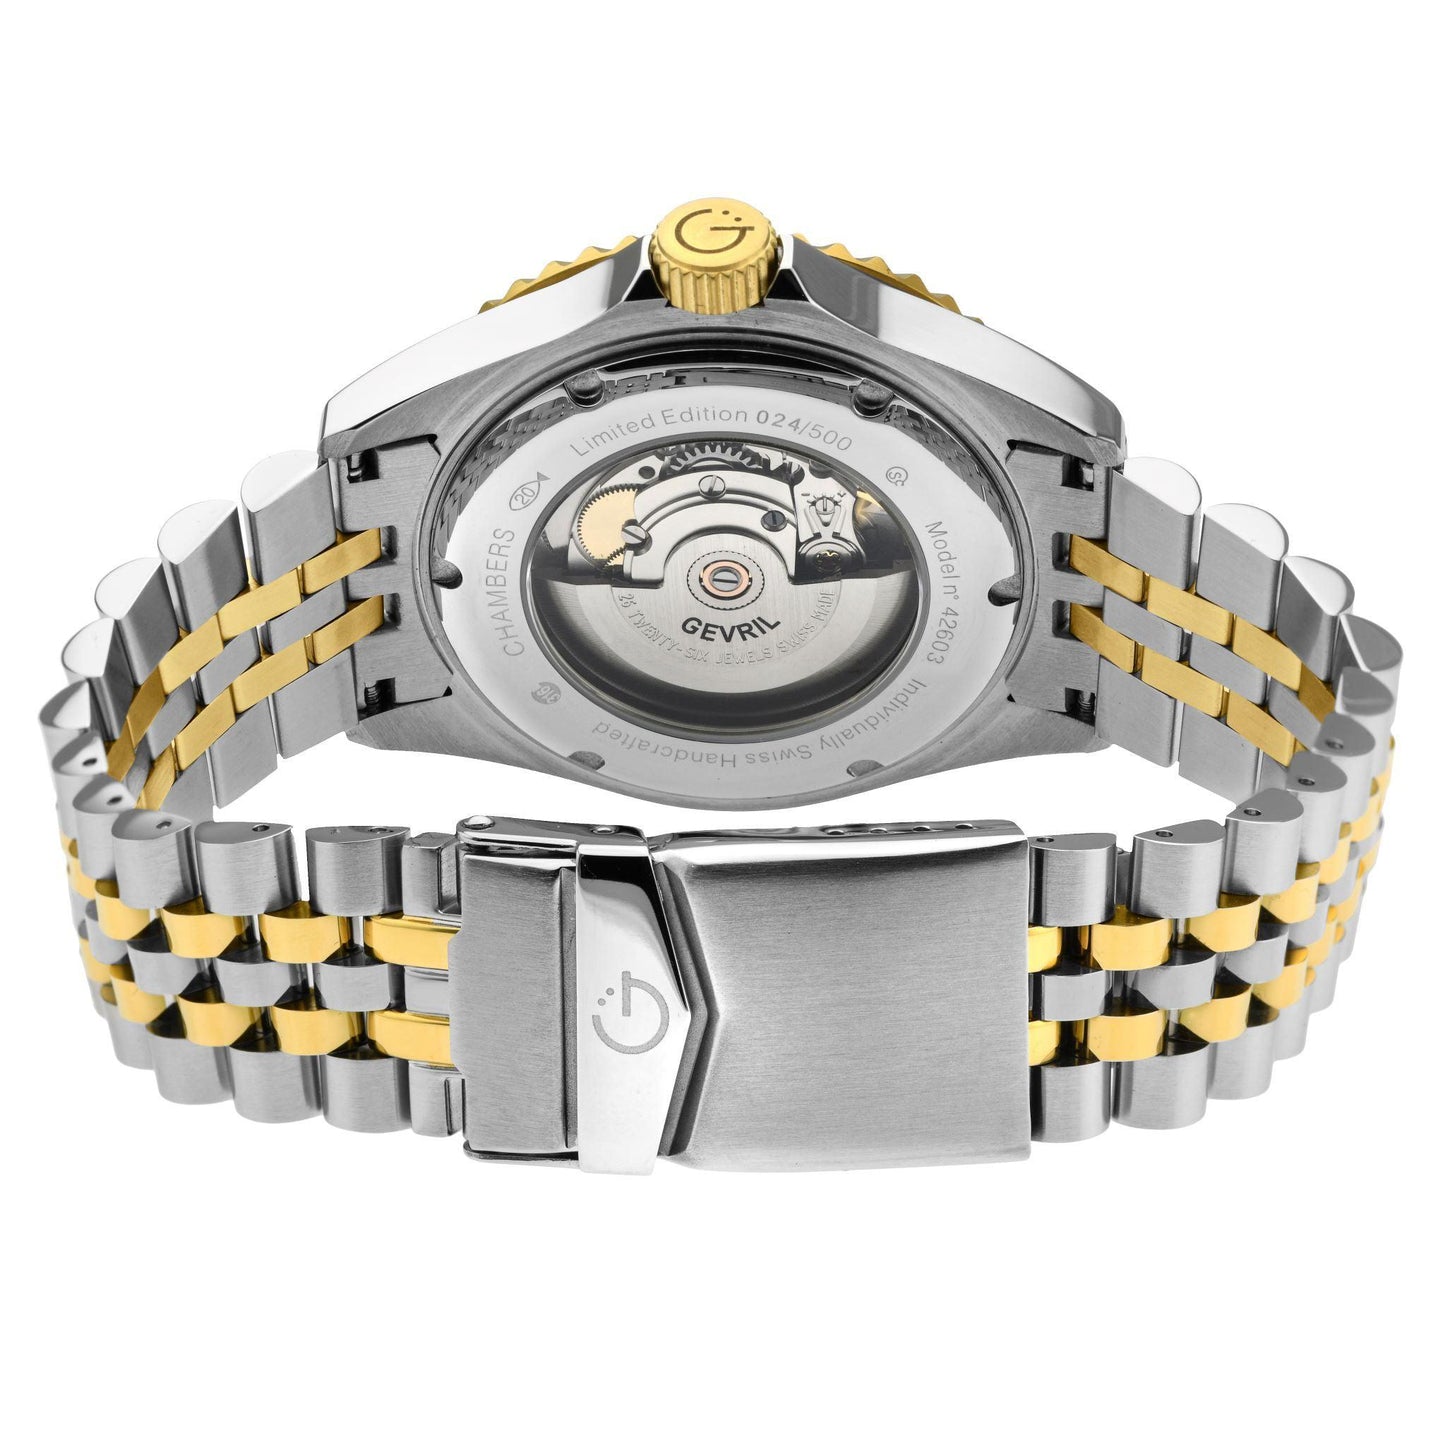 Gevril-Luxury-Swiss-Watches-Gevril Chambers Automatic - Ceramic Bezel-42602